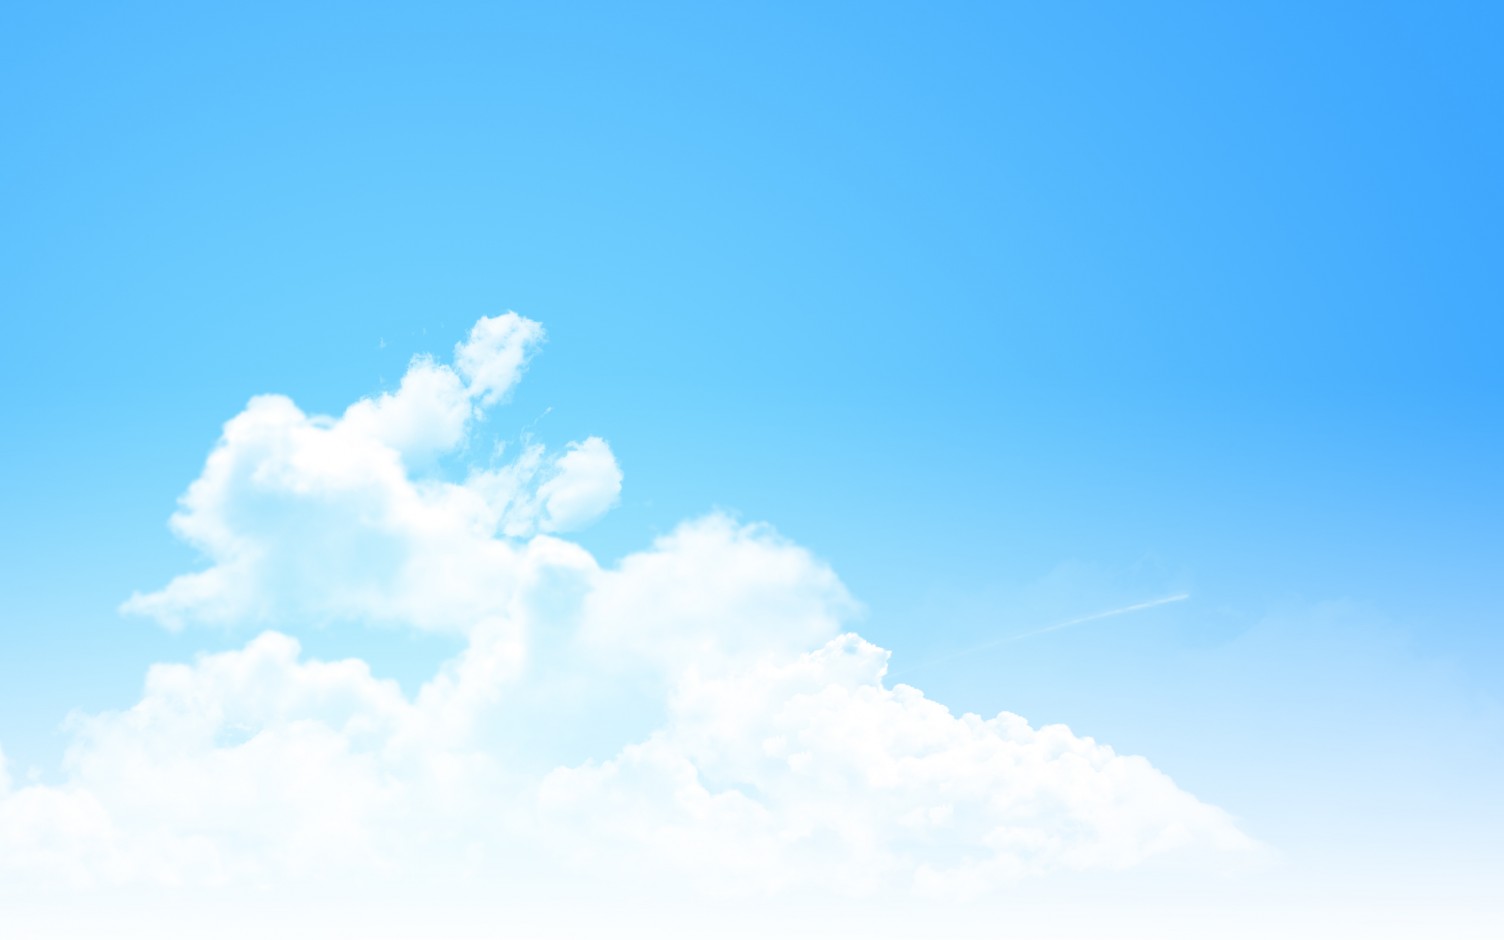 Clouds And Blue Sky Background Hd Wallpapers 2560 X 1600 2